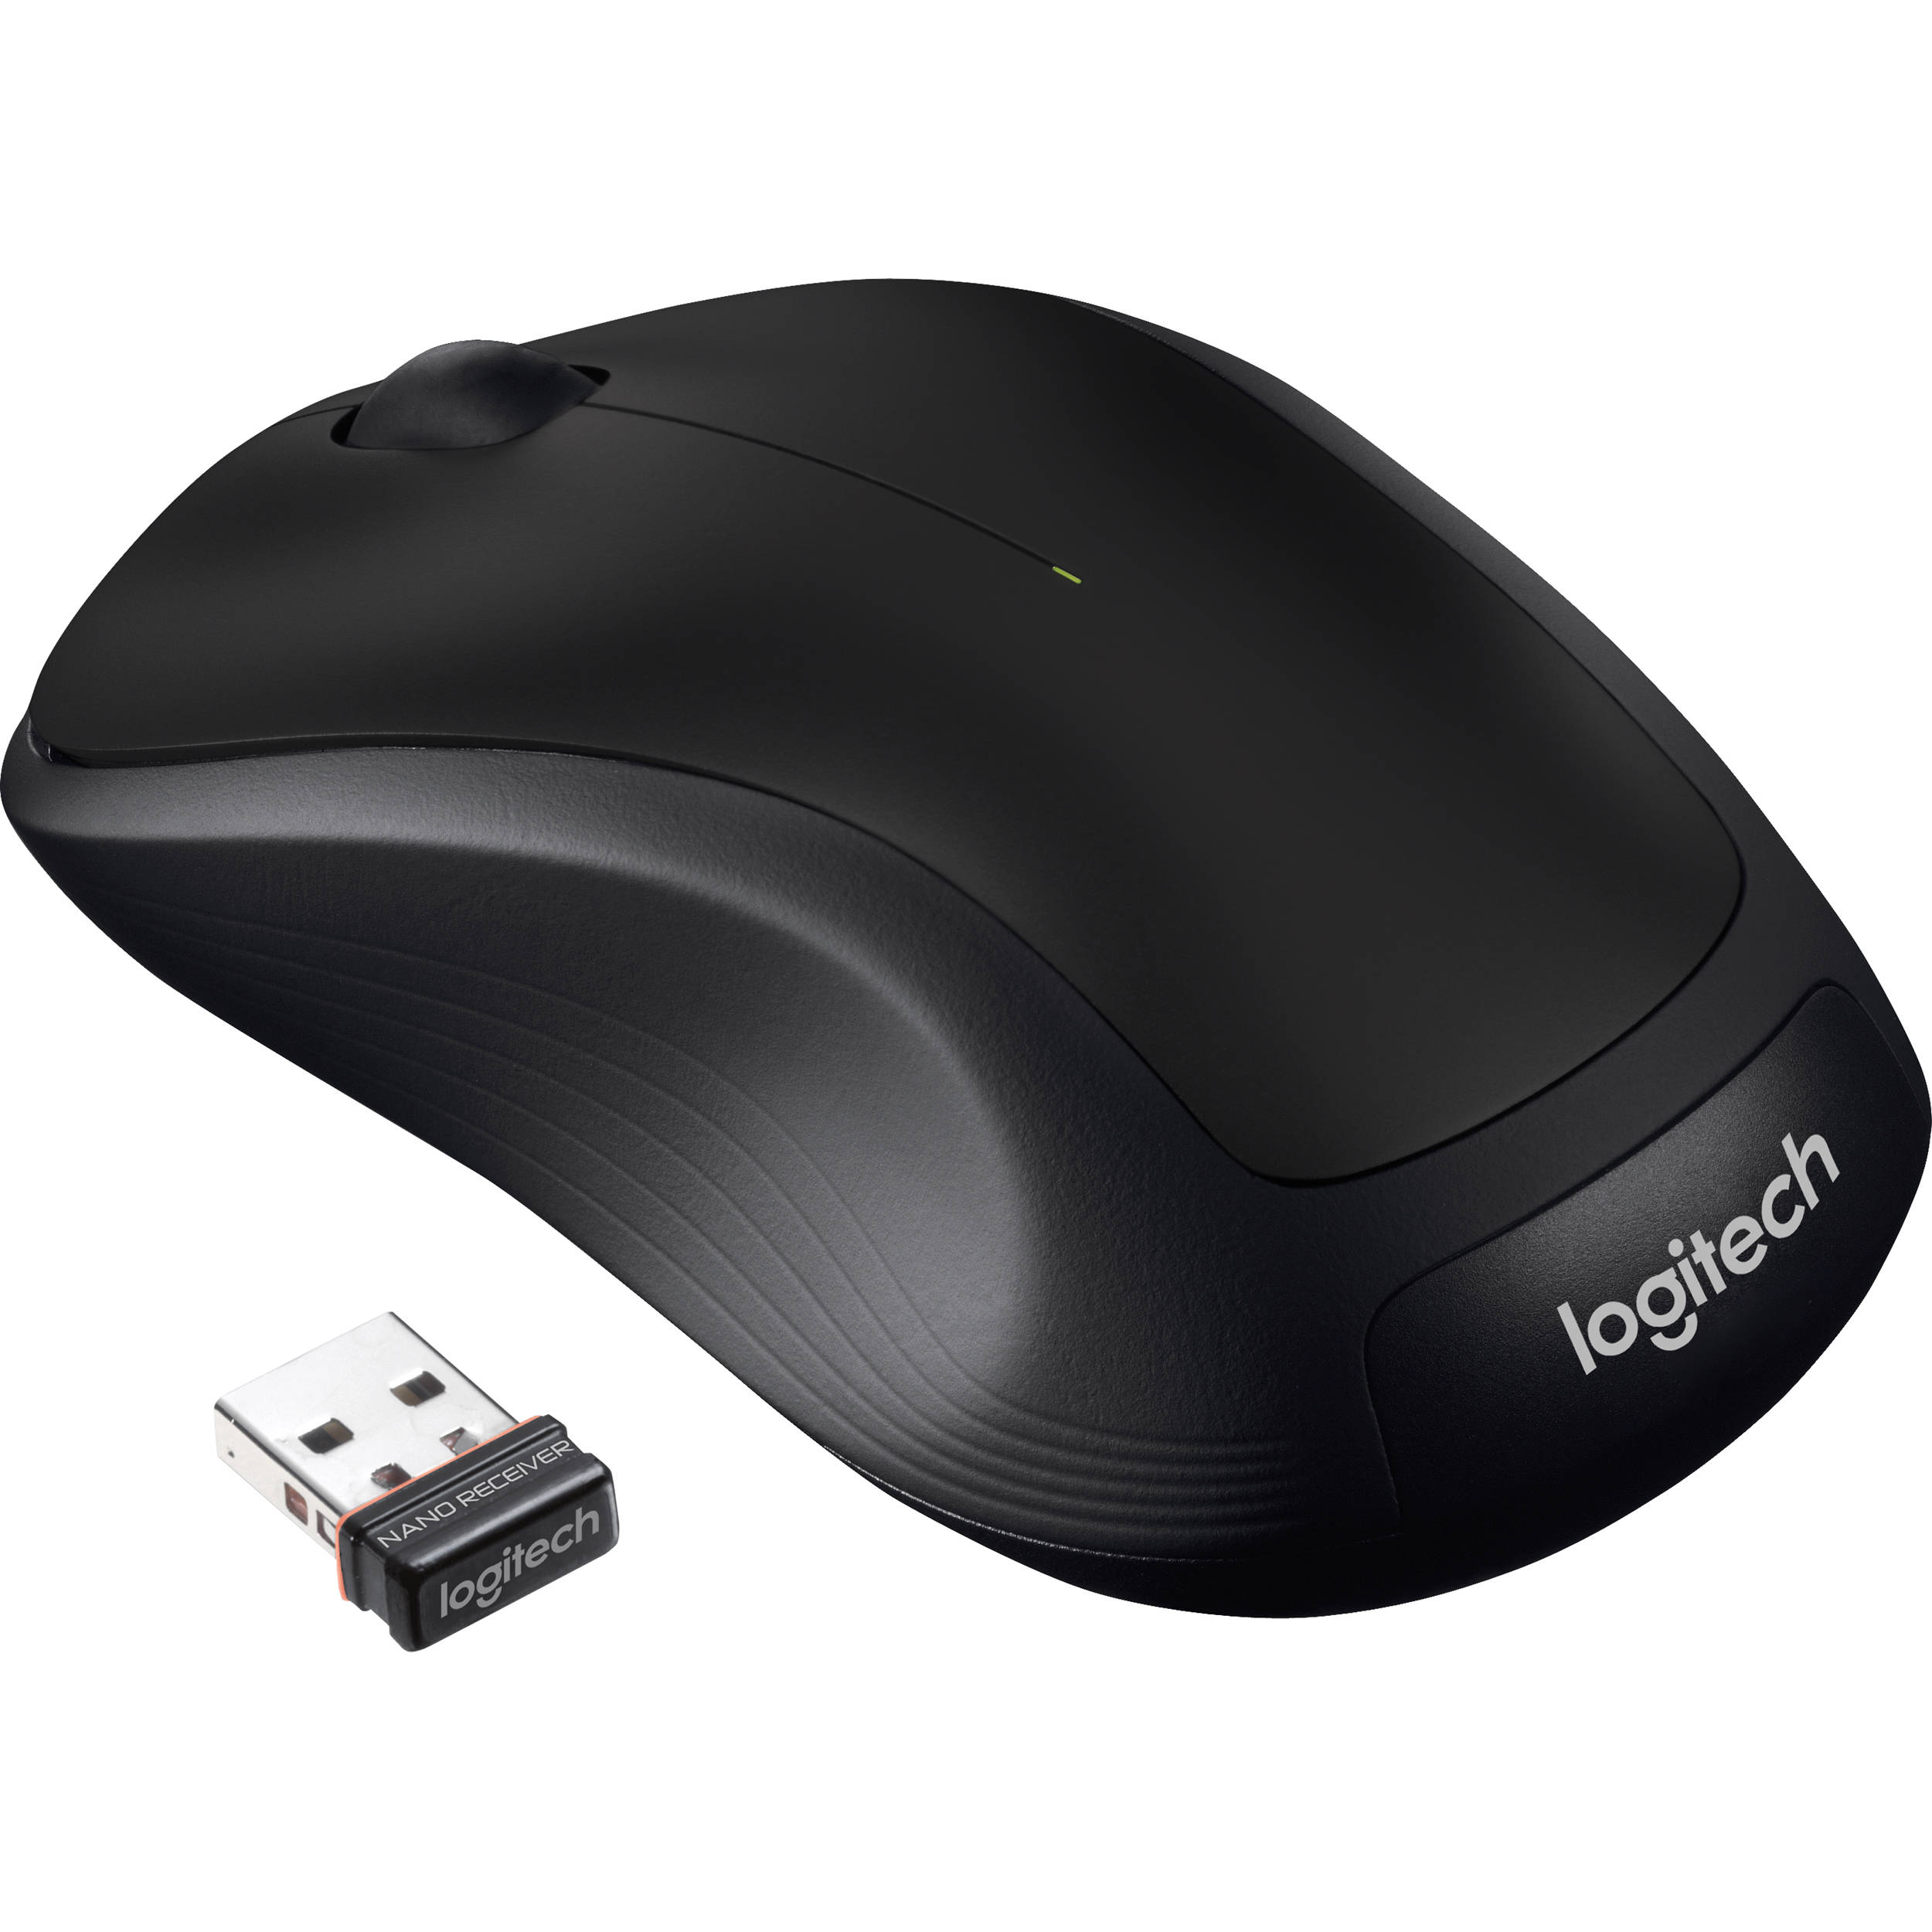 Remote mouse receiver